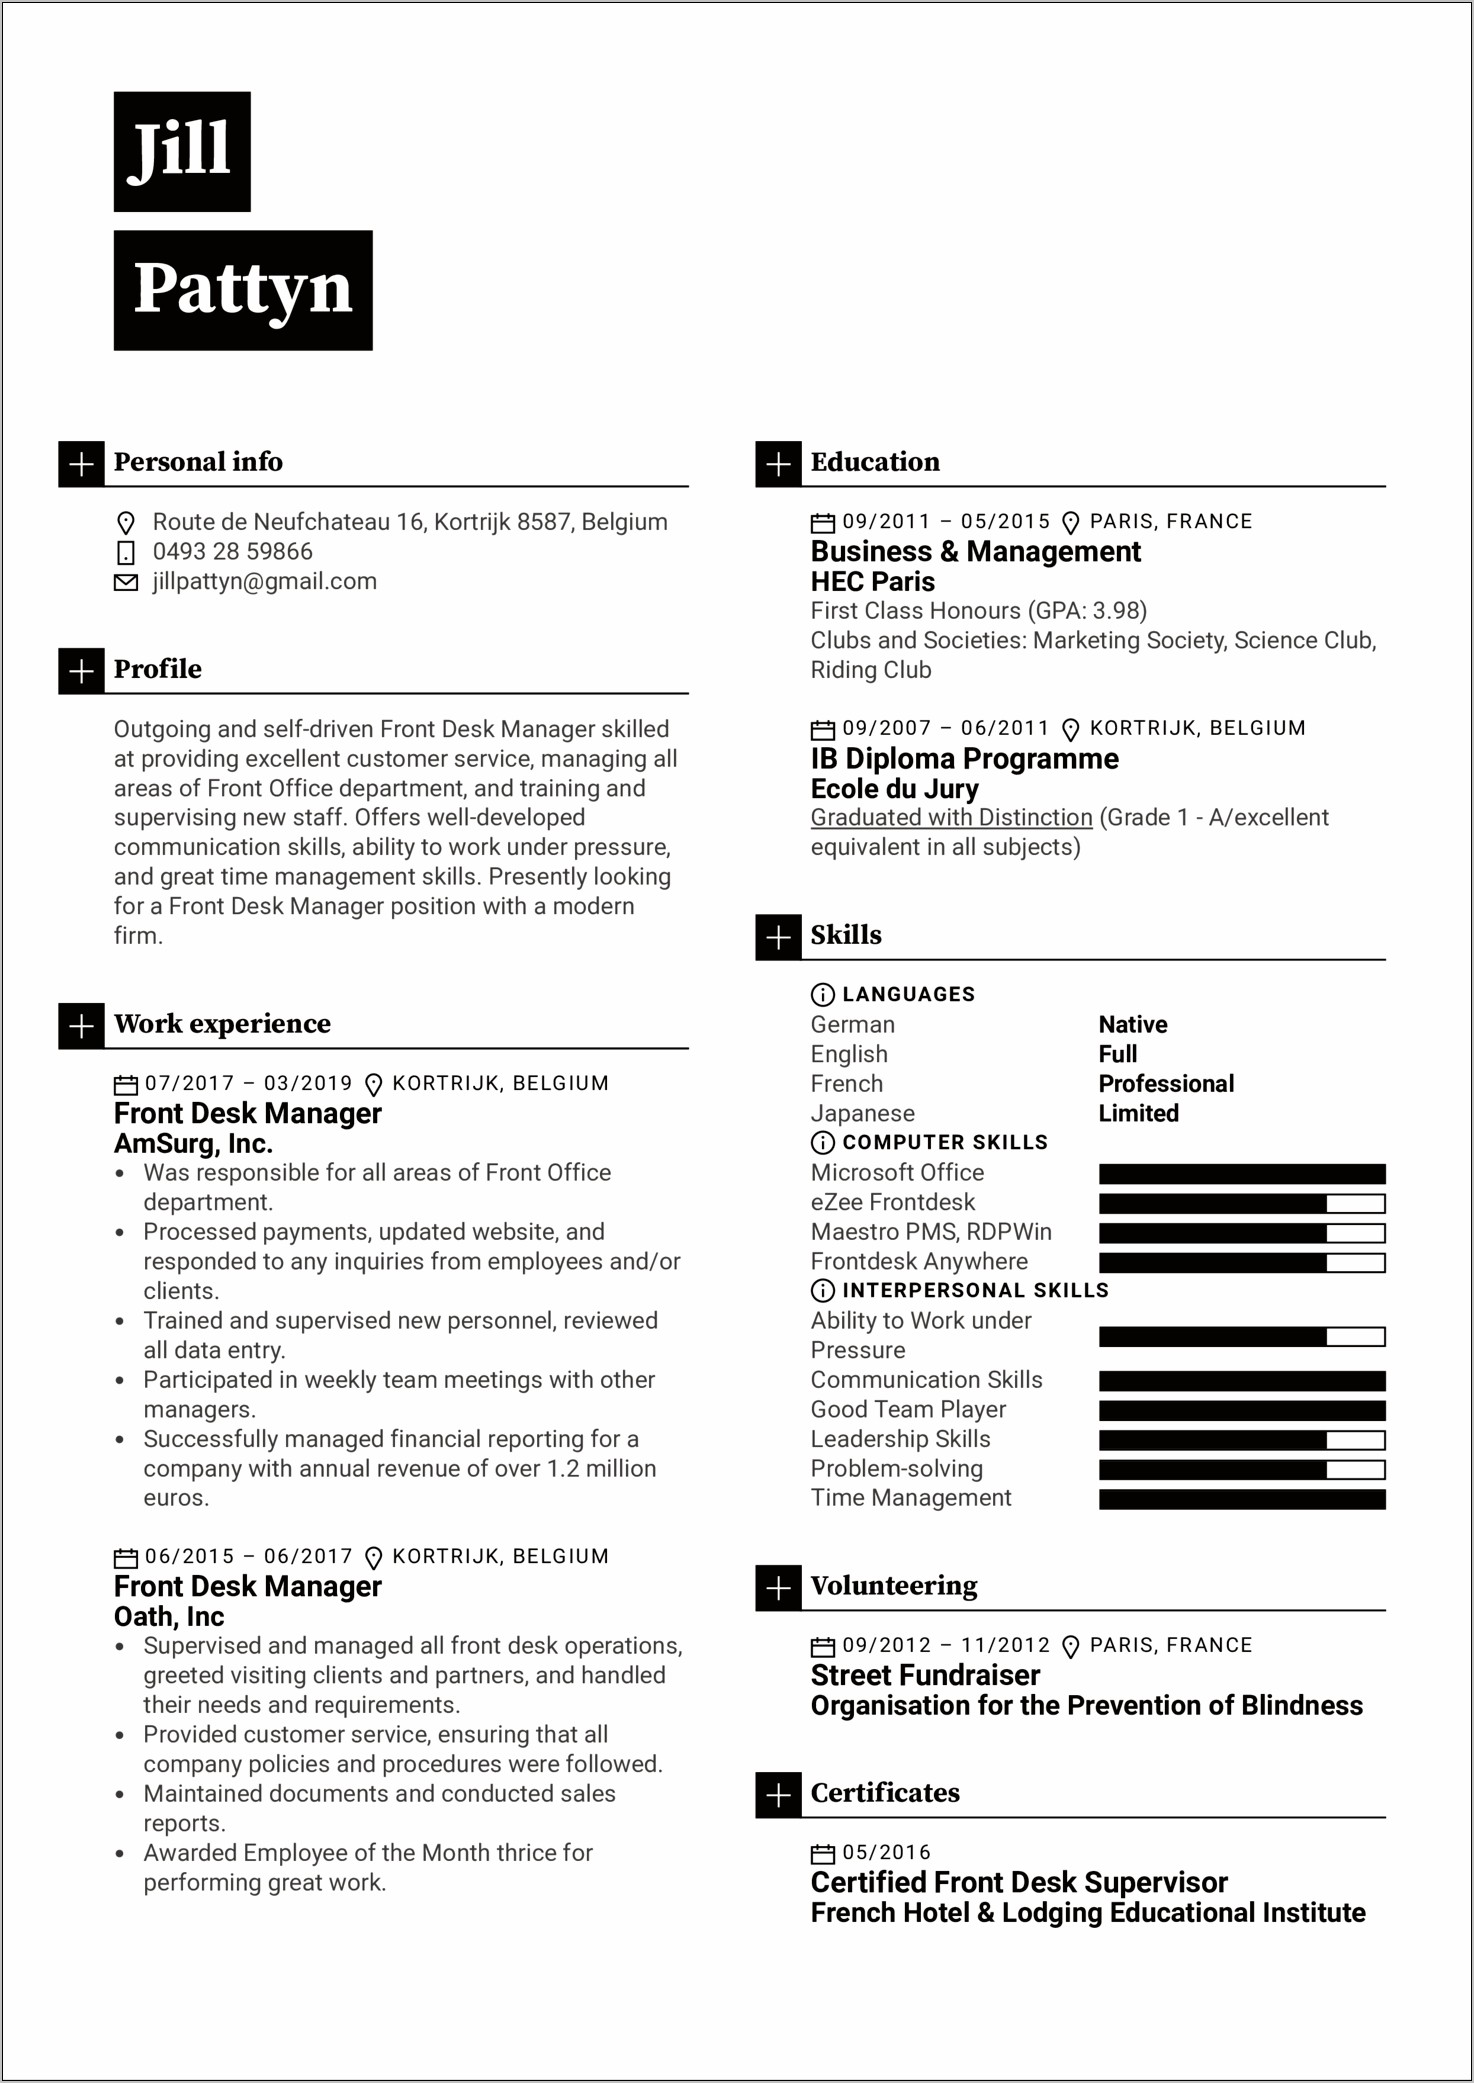 Resume Examples For It Help Desk